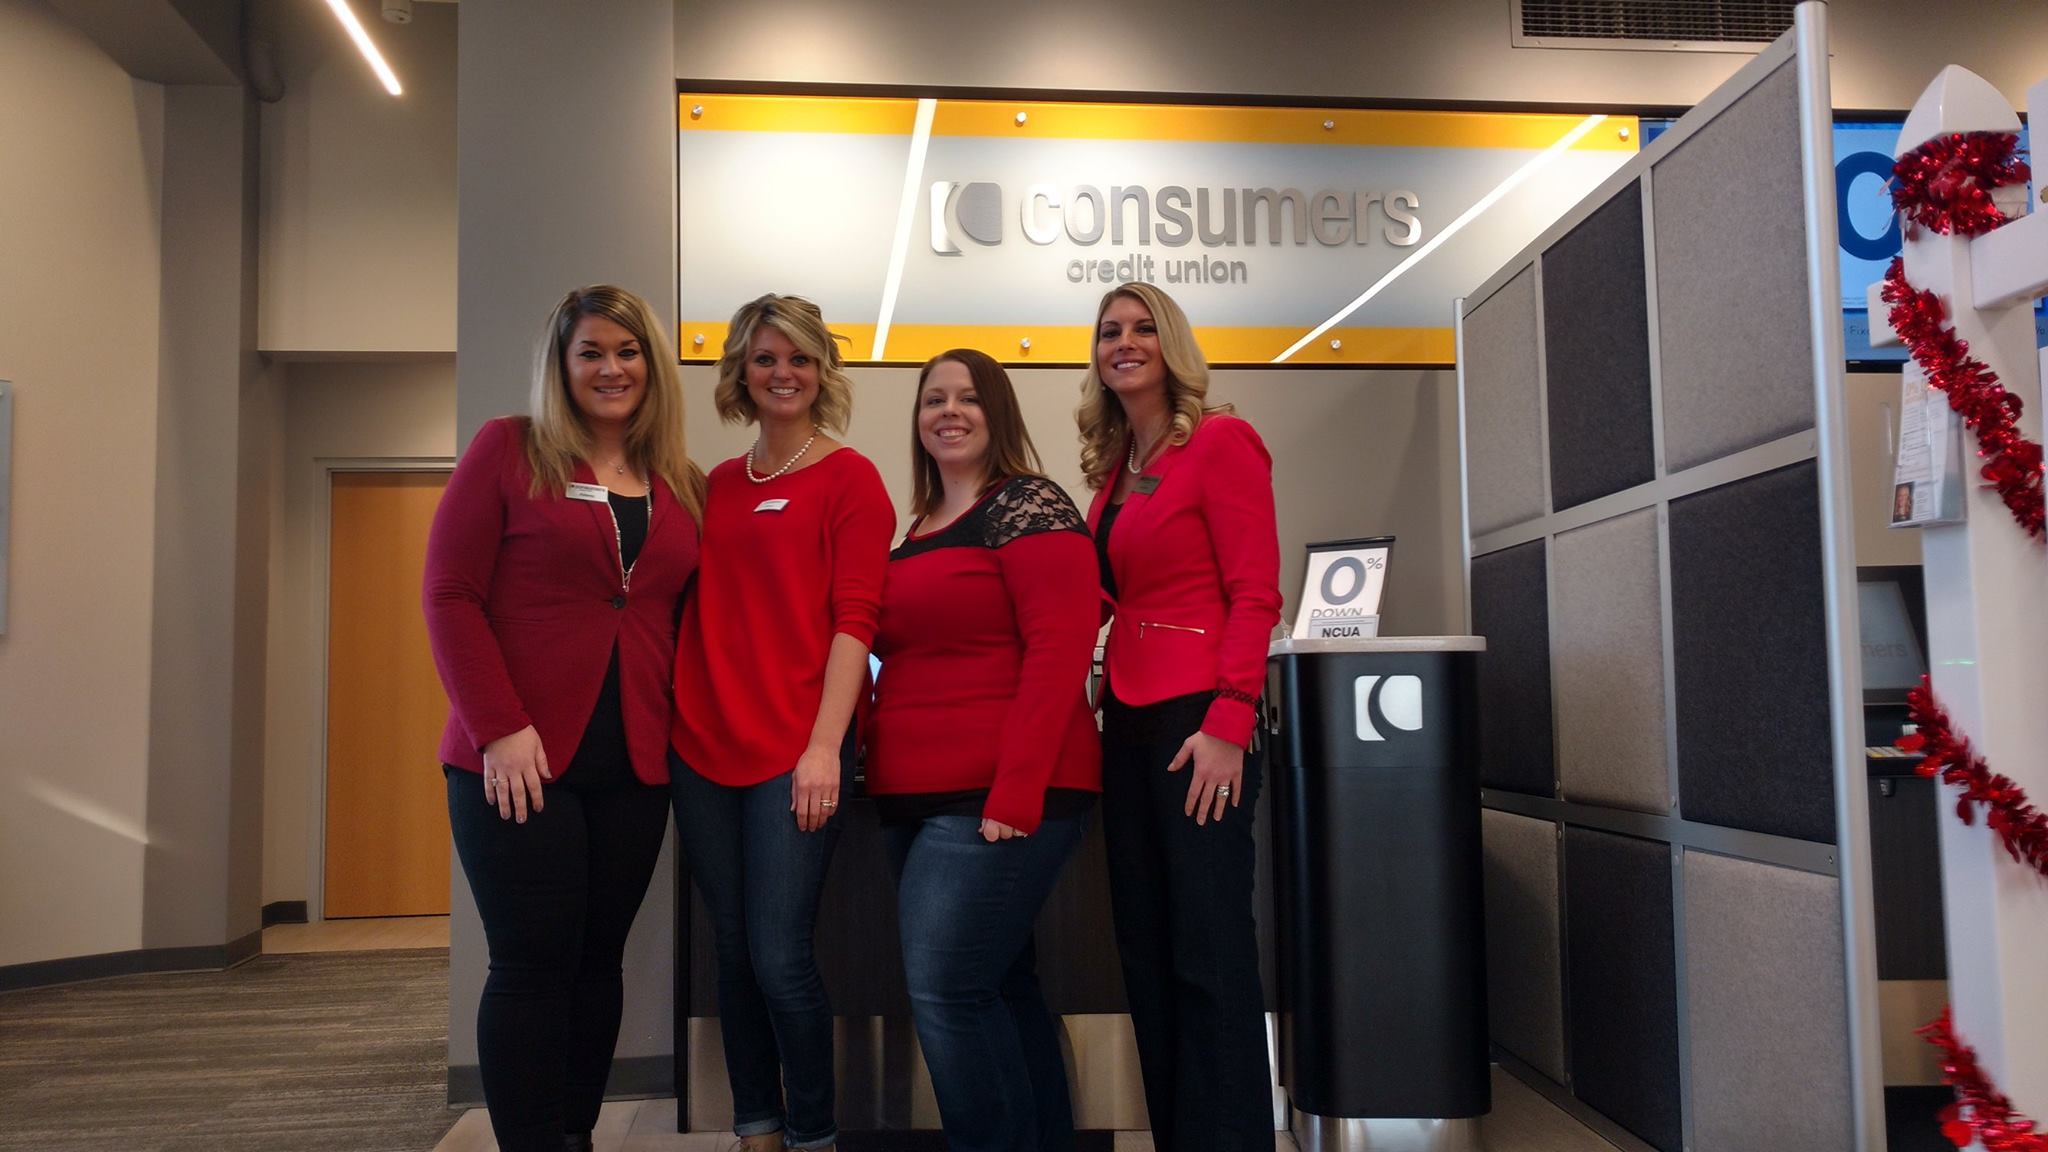 Four women in red smiling in front of an orange Consumers Credit Union sign